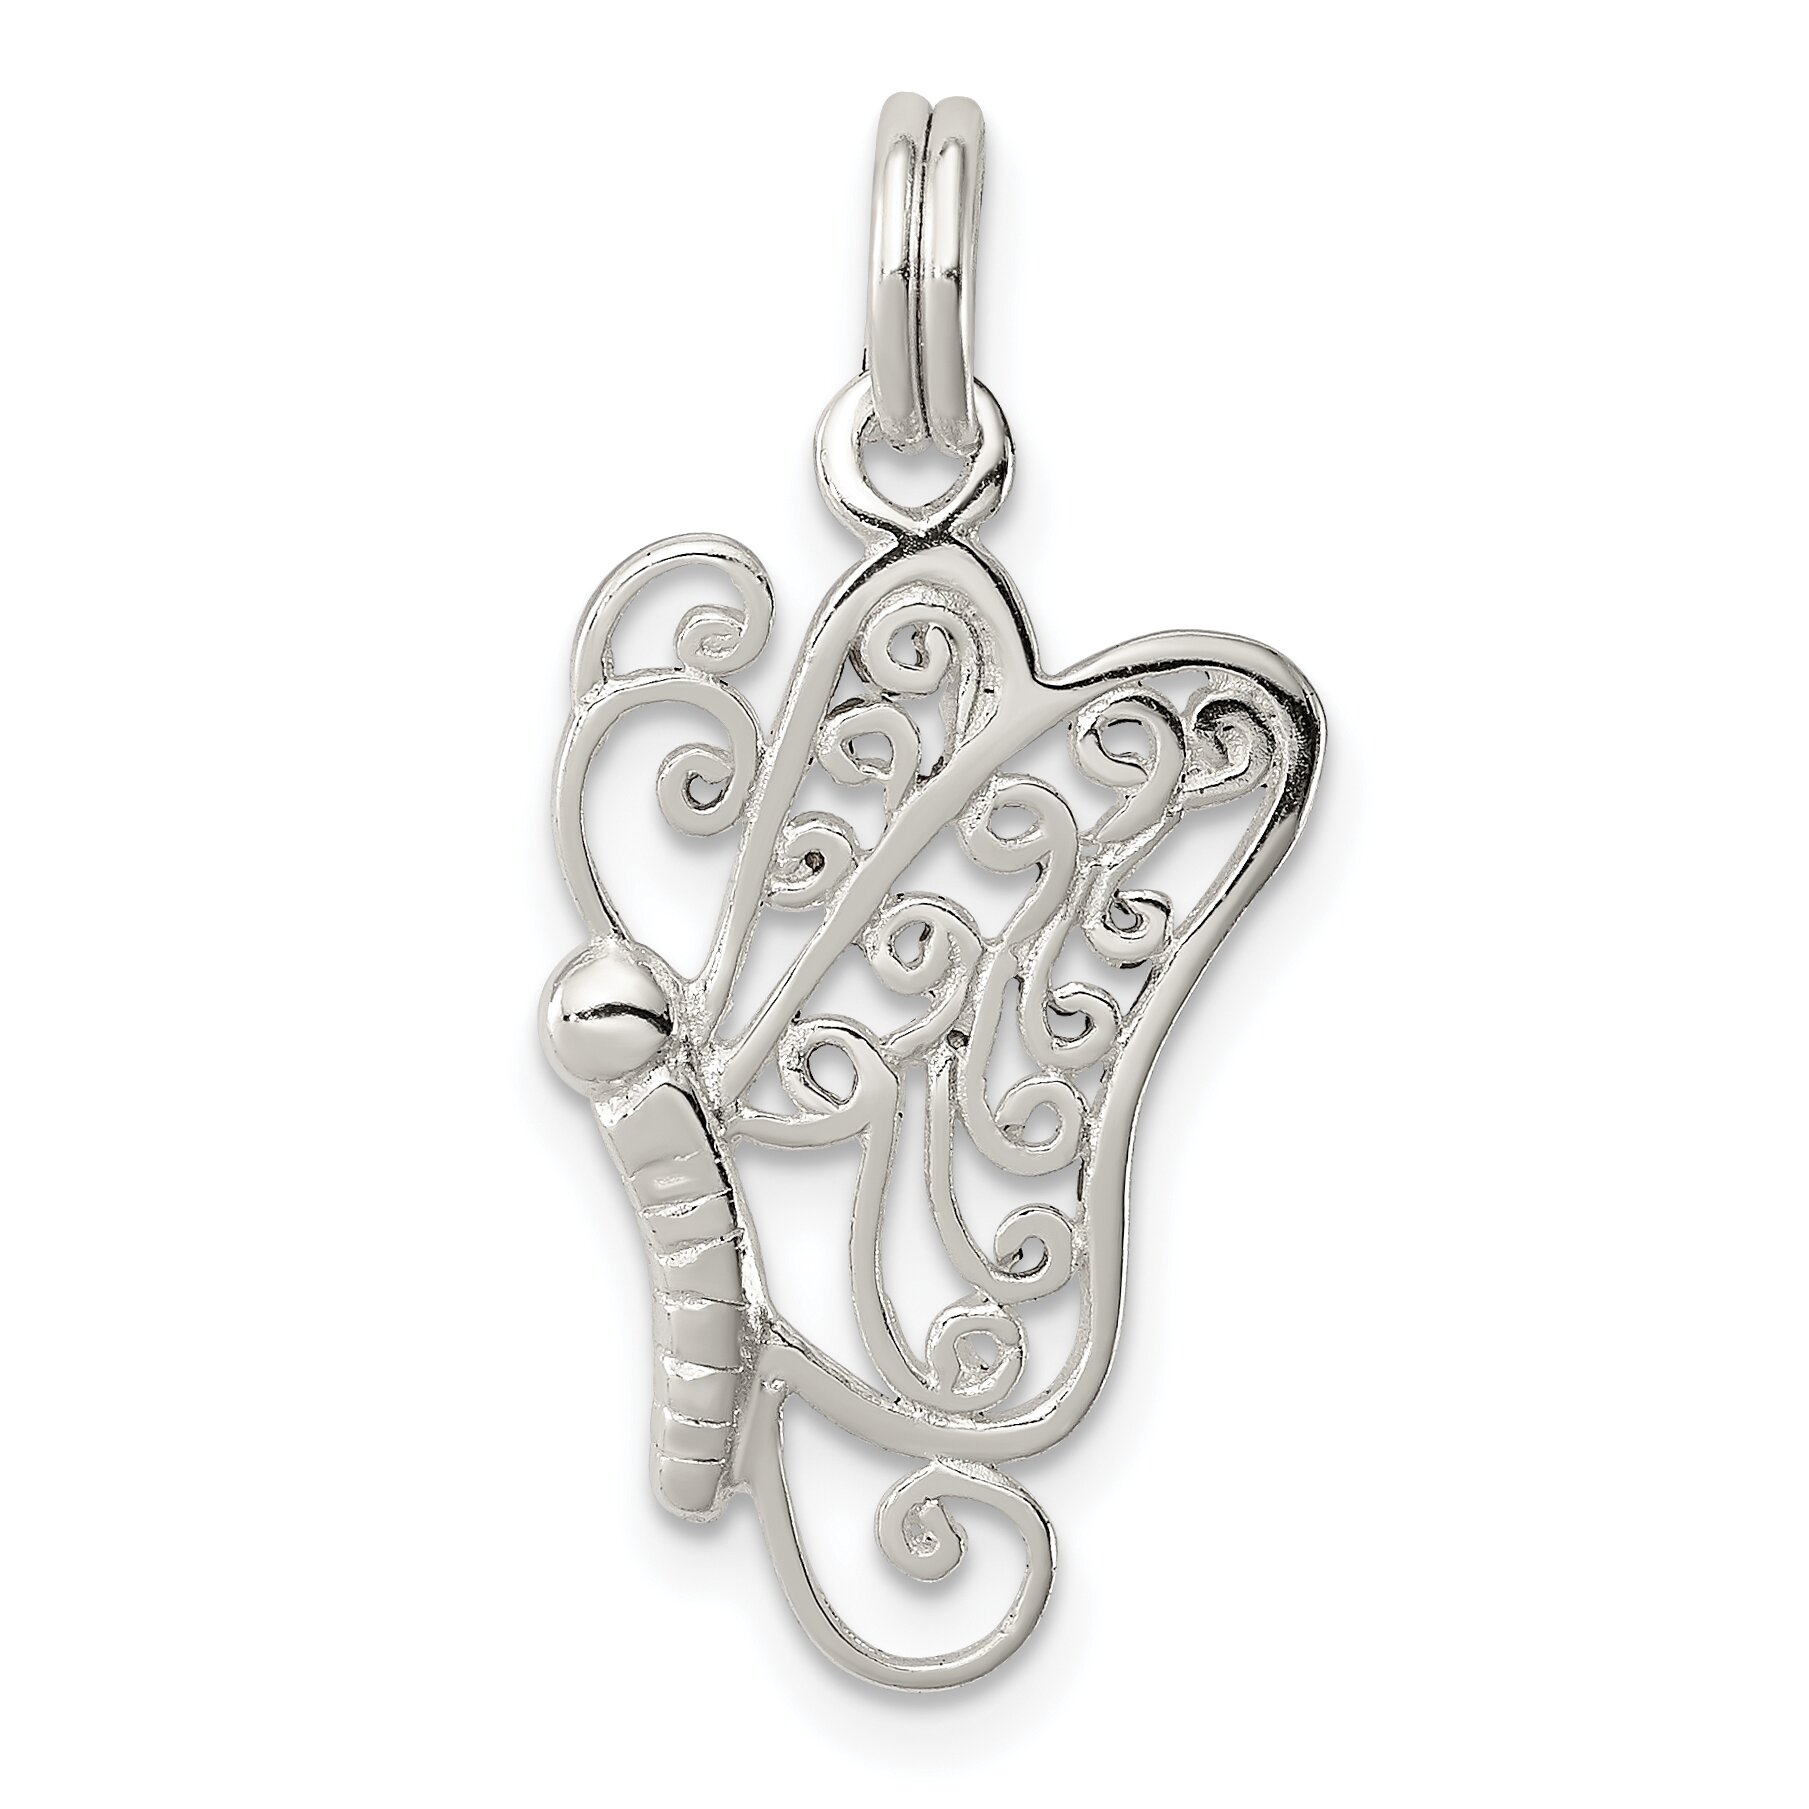 Findingking Sterling Silver Butterfly Charm